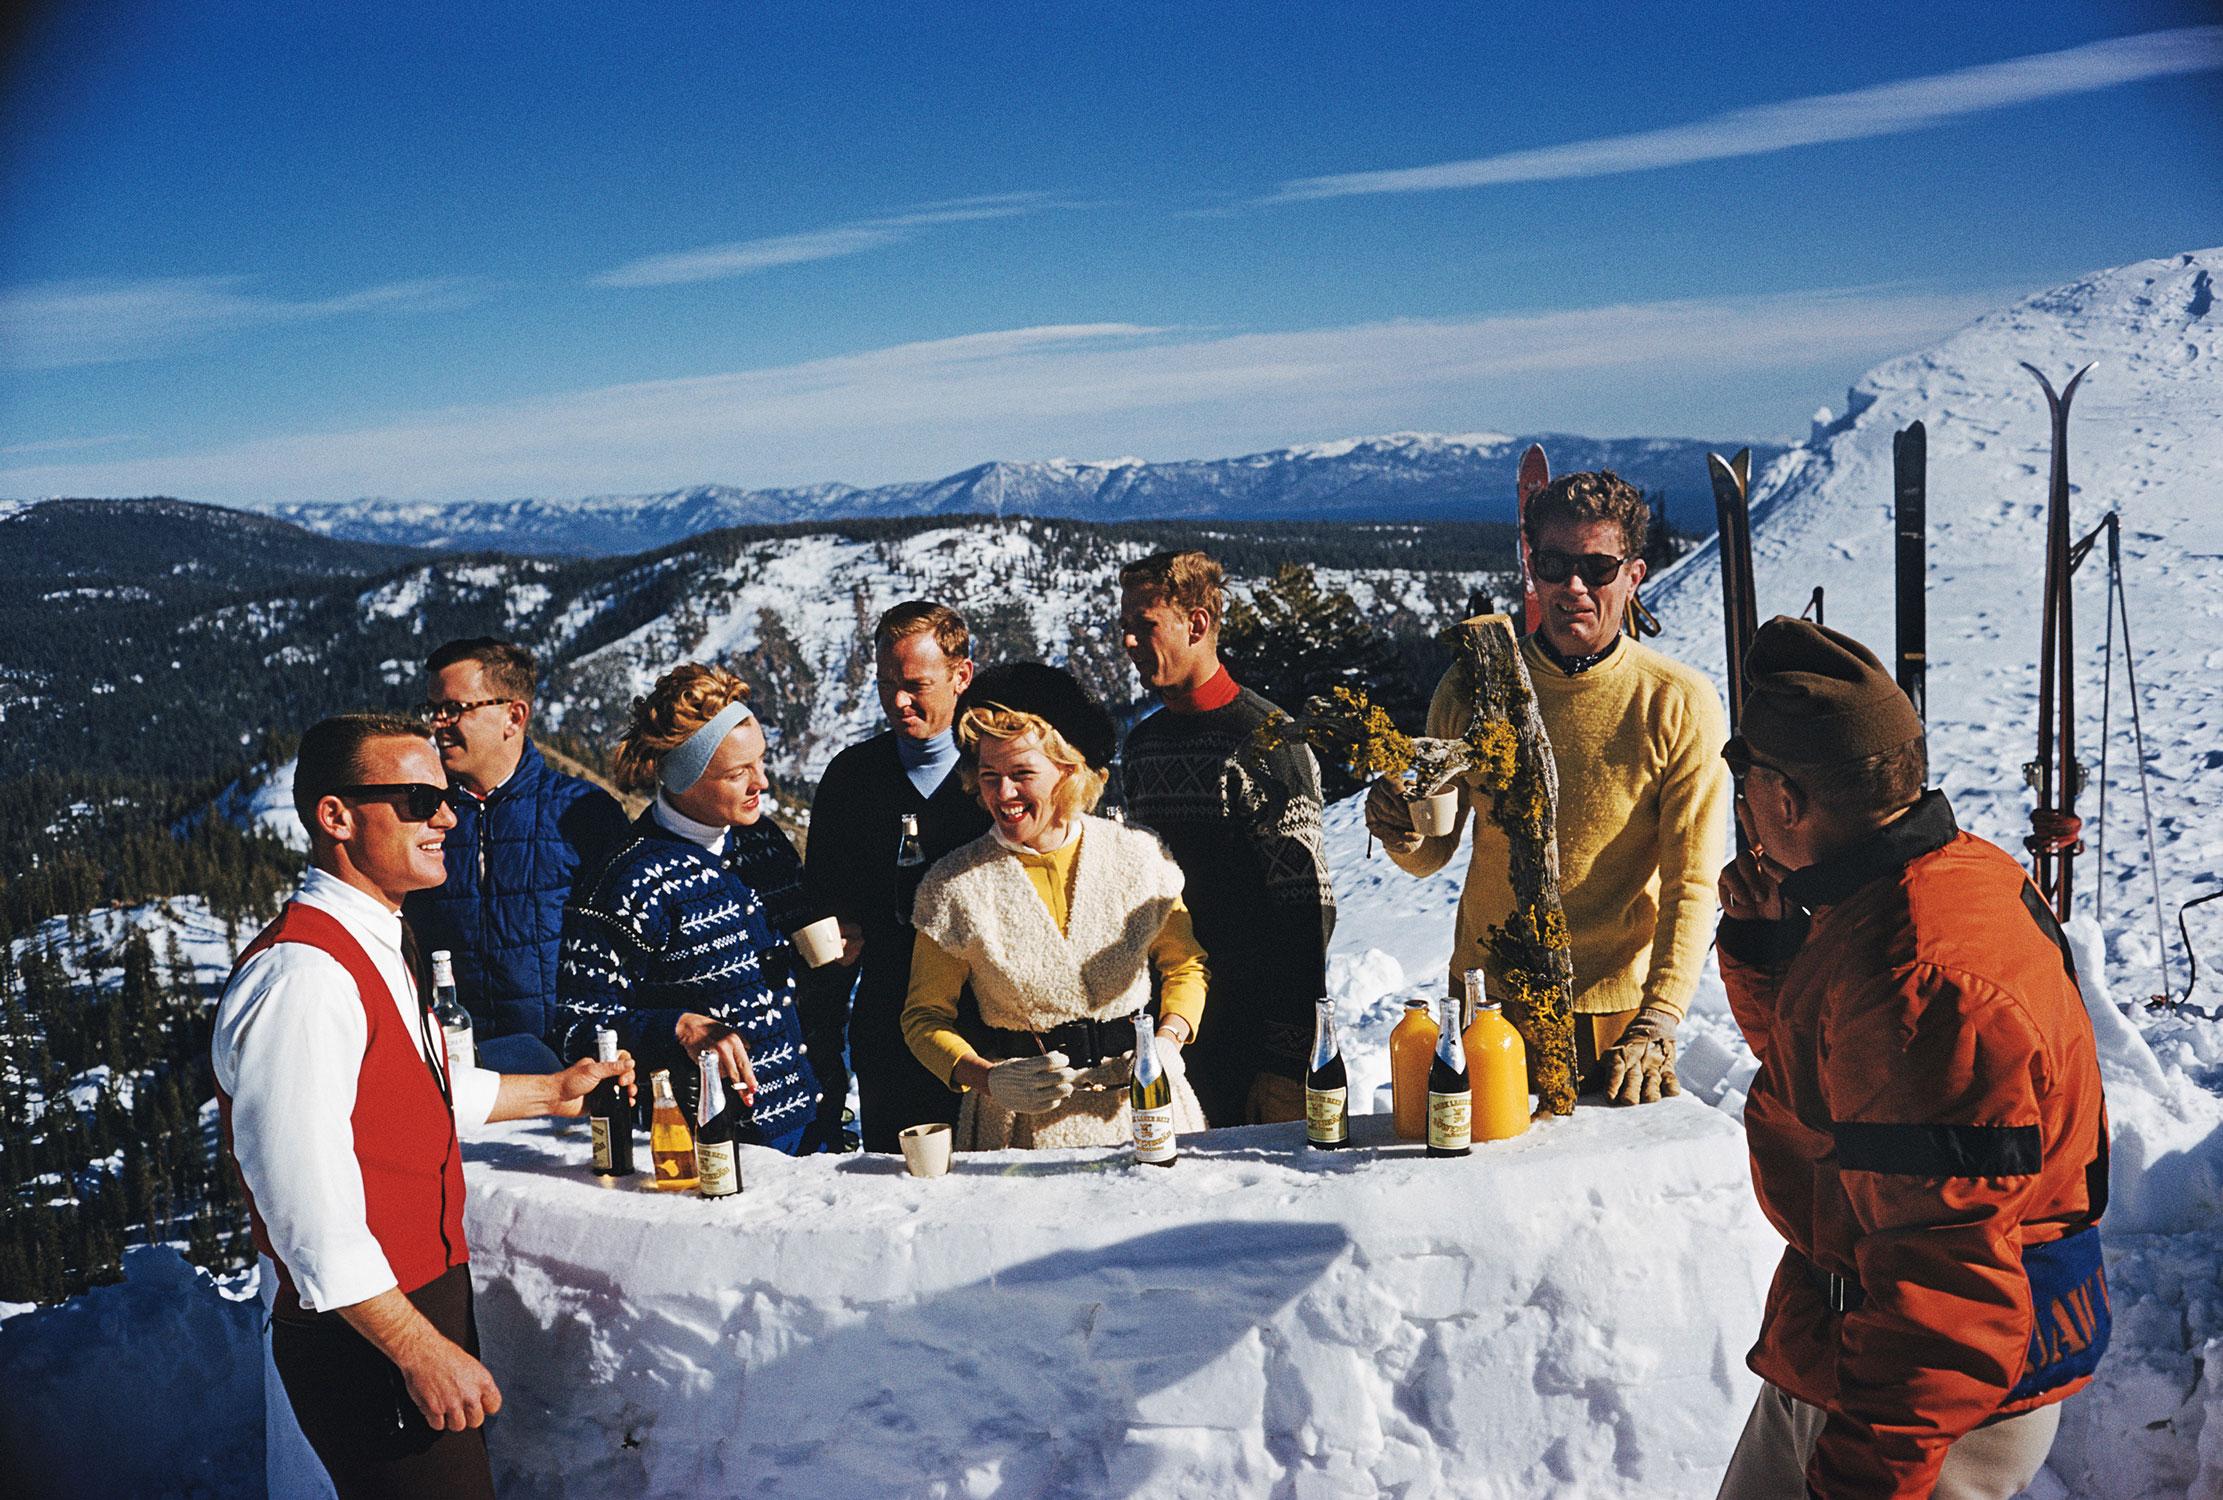 Slim Aarons
Apres Ski
1961 (printed later)
C print 
Estate stamped and numbered edition of 150 
with Certificate of authenticity

A party of skiers adjourn for drinks at the bar on top of peak KT-22, Squaw Valley, California, 1961. Second from right